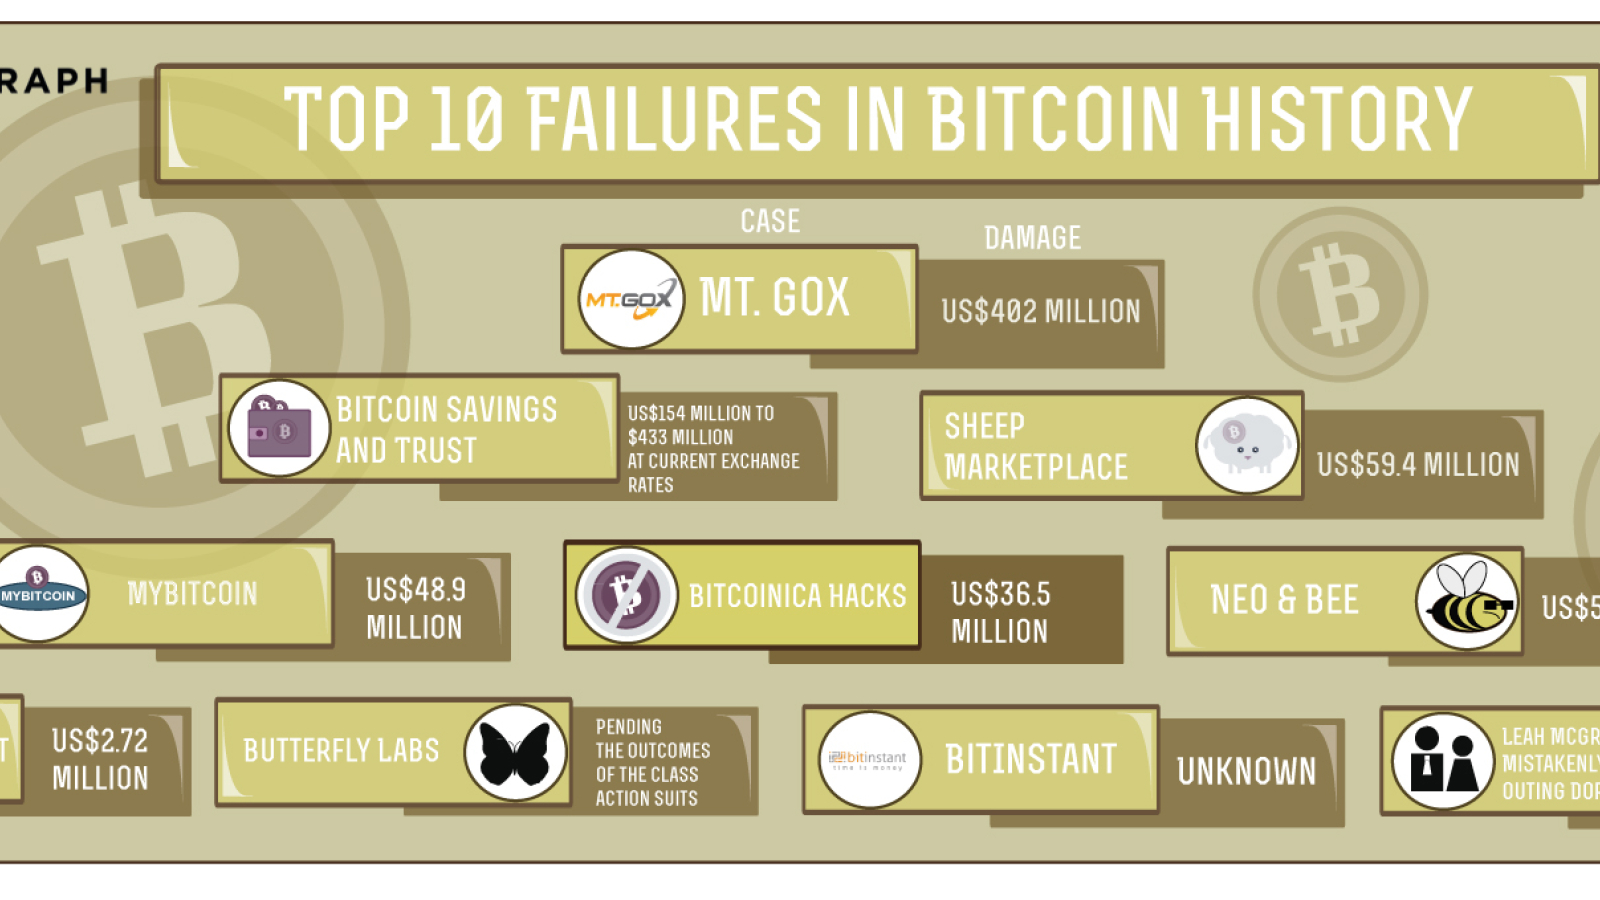 Mt. Gox is the number one BTC failure ever